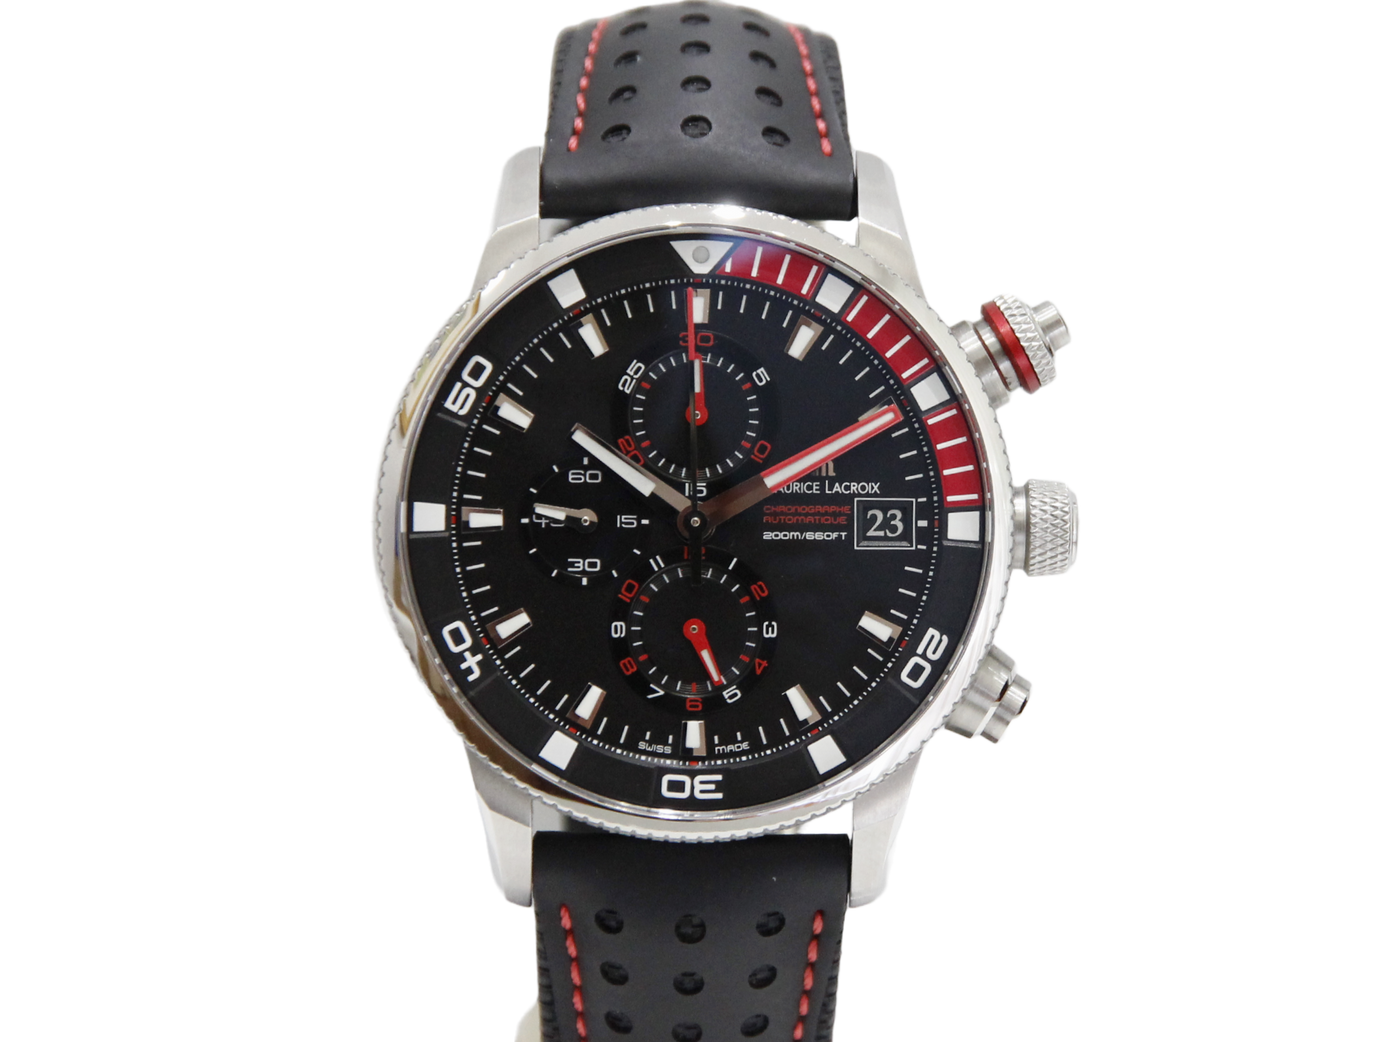 Maurice Lacroix Pontos S Supercharged Stainless Steel 48mm